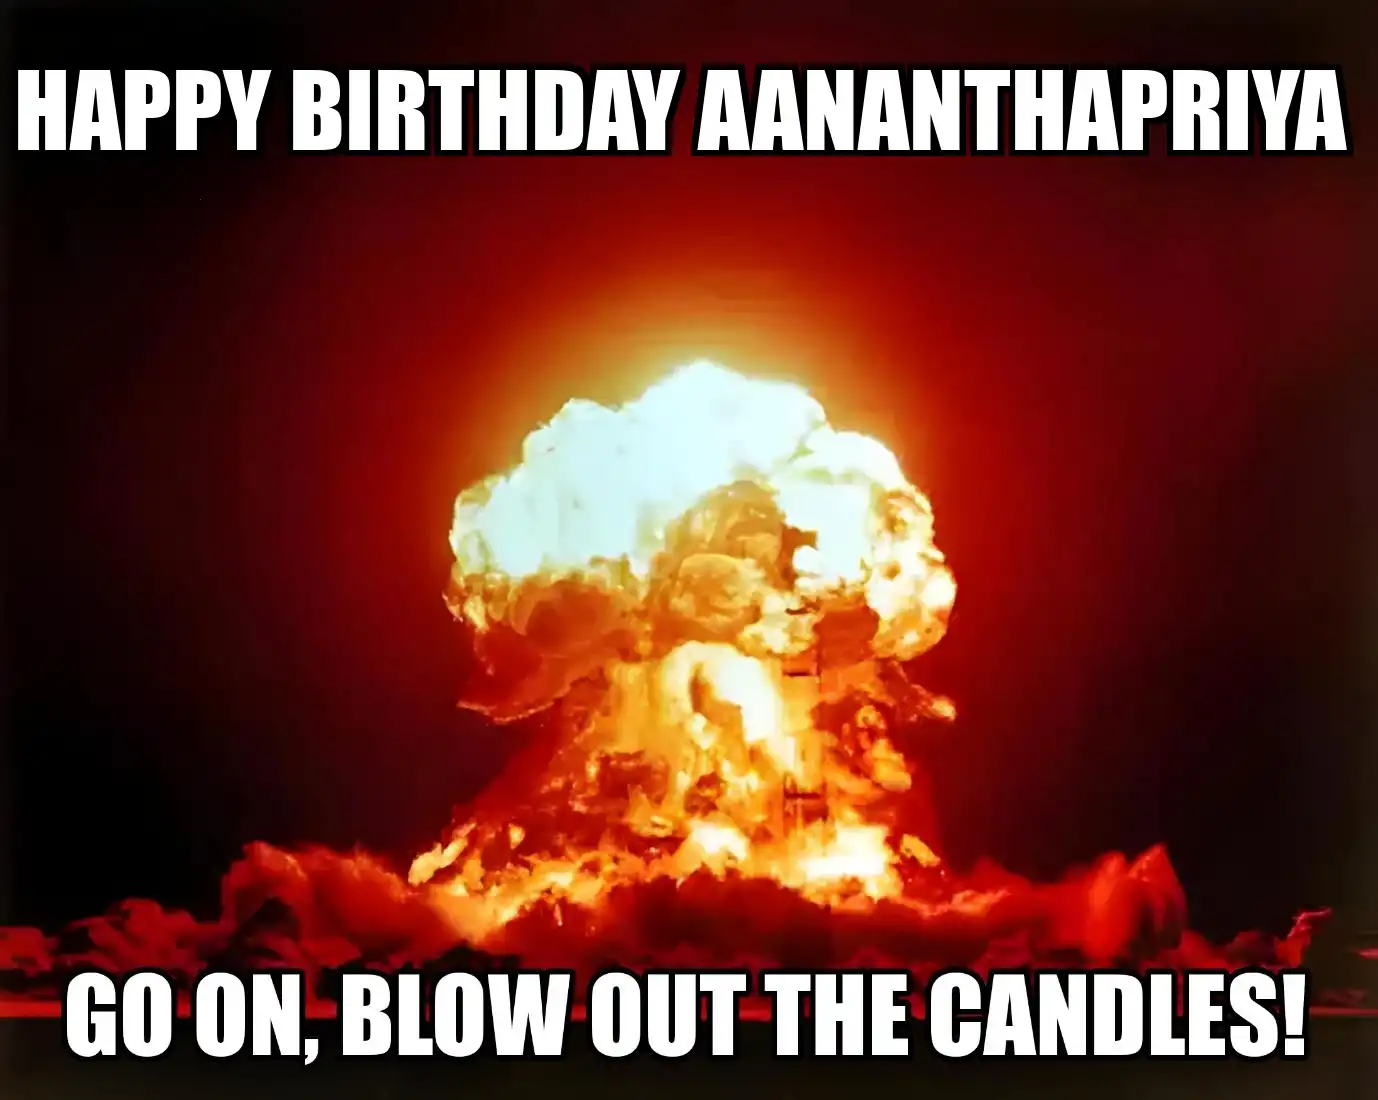 Happy Birthday Aananthapriya Go On Blow Out The Candles Meme